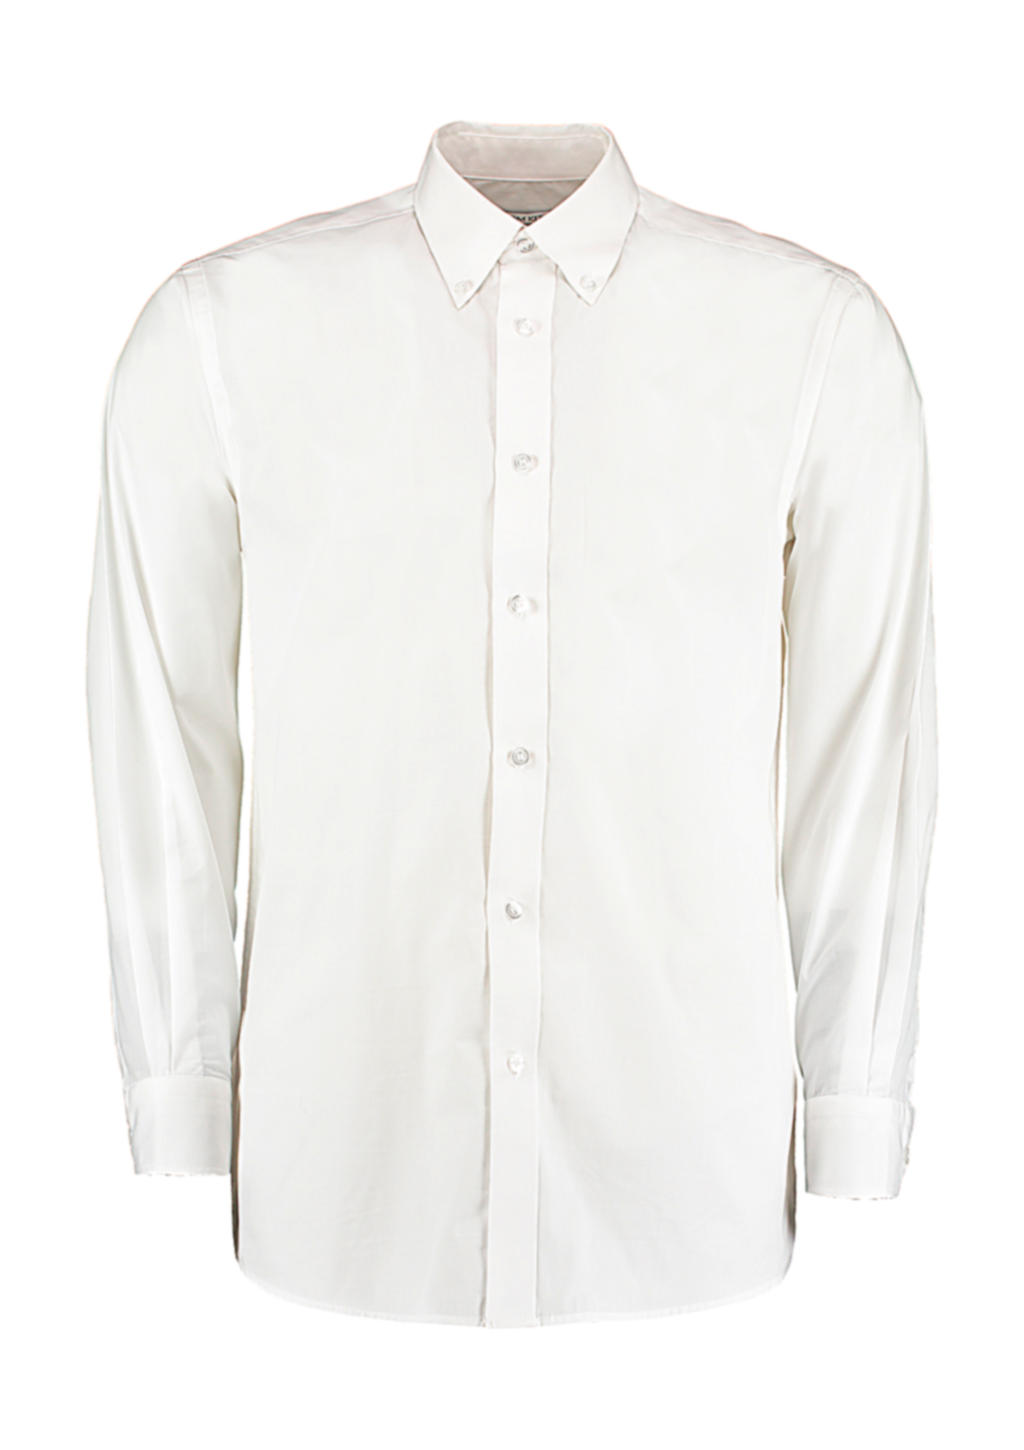 730.11 / Tailored Fit Business Shirt